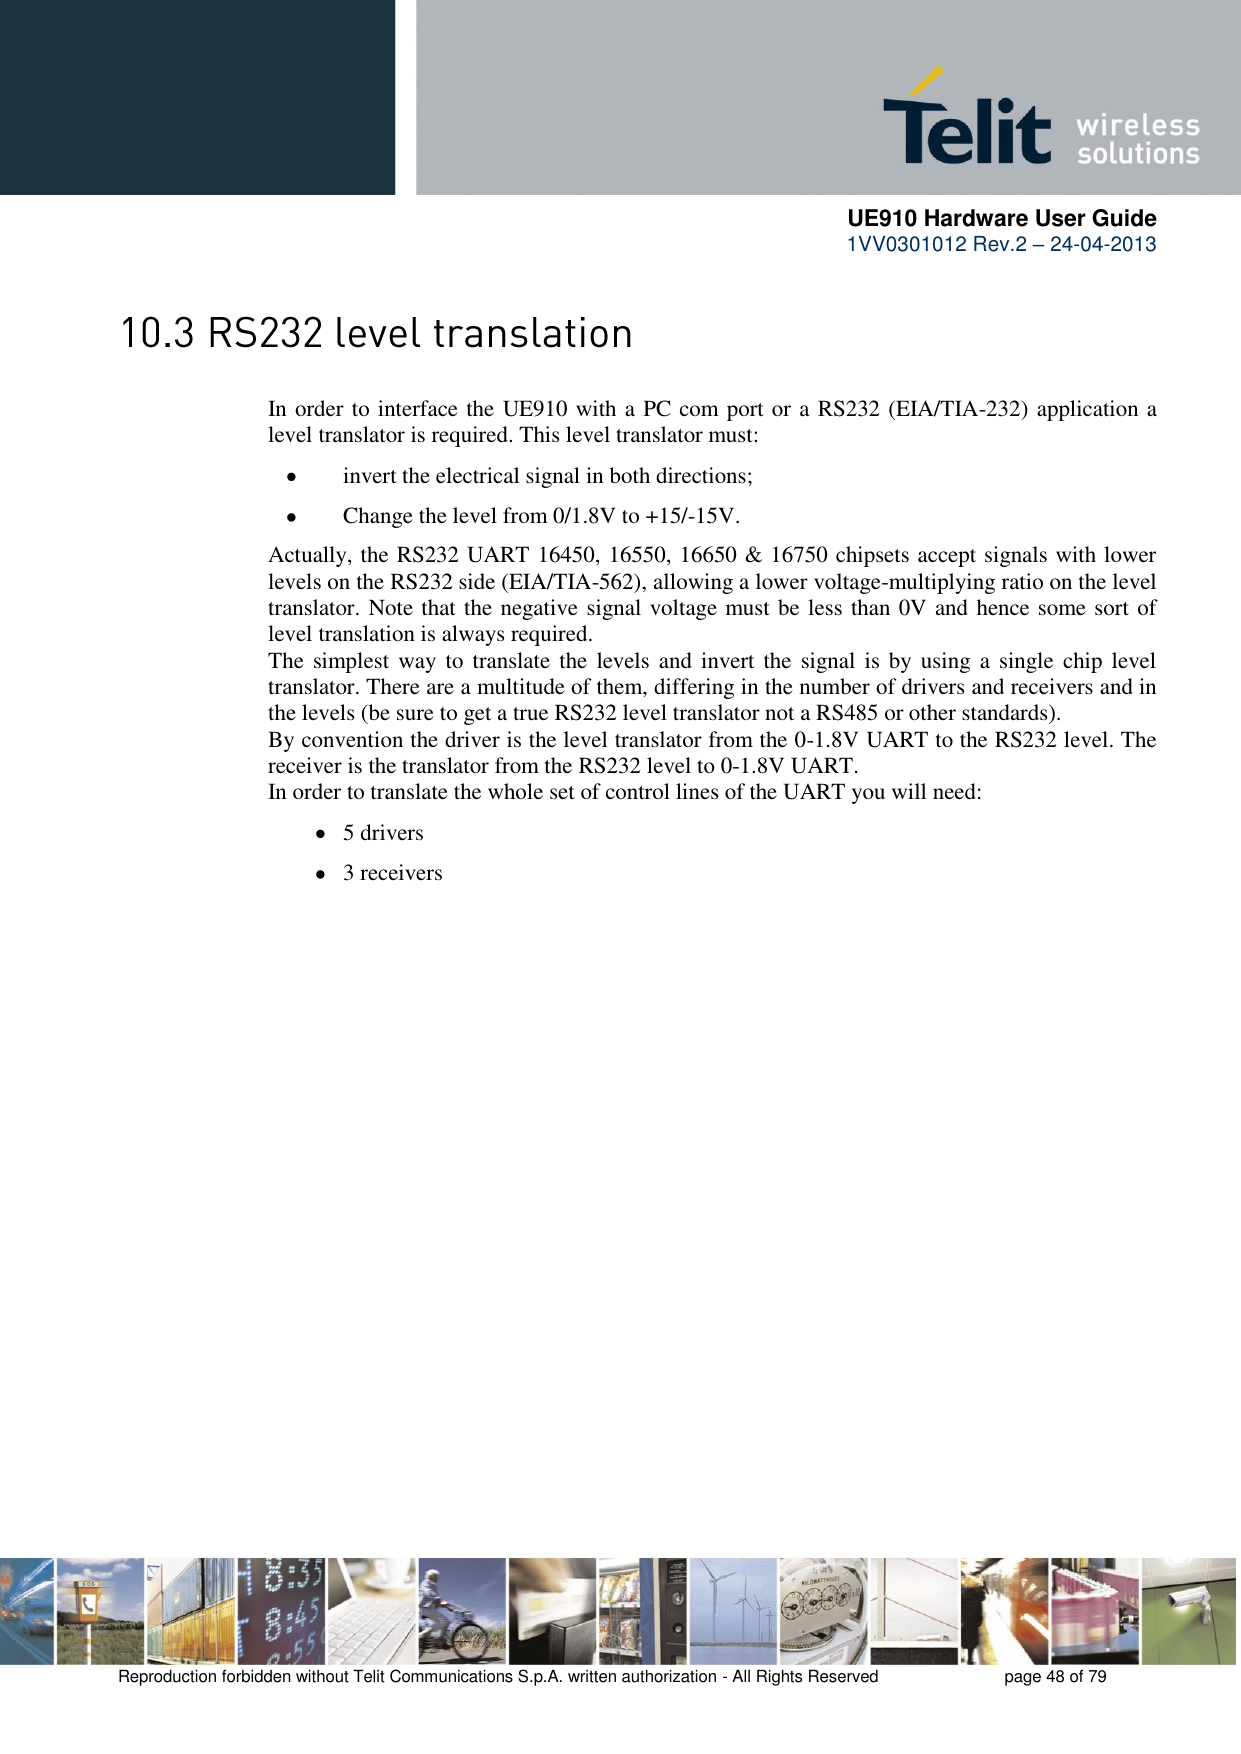      UE910 Hardware User Guide  1VV0301012 Rev.2 – 24-04-2013    Reproduction forbidden without Telit Communications S.p.A. written authorization - All Rights Reserved    page 48 of 79   In order to interface the UE910 with a PC com port or a RS232 (EIA/TIA-232) application a level translator is required. This level translator must:  invert the electrical signal in both directions;  Change the level from 0/1.8V to +15/-15V. Actually, the RS232 UART 16450, 16550, 16650 &amp; 16750 chipsets accept signals with lower levels on the RS232 side (EIA/TIA-562), allowing a lower voltage-multiplying ratio on the level translator. Note that the negative signal voltage must be less than 0V and hence some sort of level translation is always required.  The simplest way  to translate the  levels  and invert the  signal is by  using a  single  chip level translator. There are a multitude of them, differing in the number of drivers and receivers and in the levels (be sure to get a true RS232 level translator not a RS485 or other standards). By convention the driver is the level translator from the 0-1.8V UART to the RS232 level. The receiver is the translator from the RS232 level to 0-1.8V UART. In order to translate the whole set of control lines of the UART you will need:  5 drivers  3 receivers 